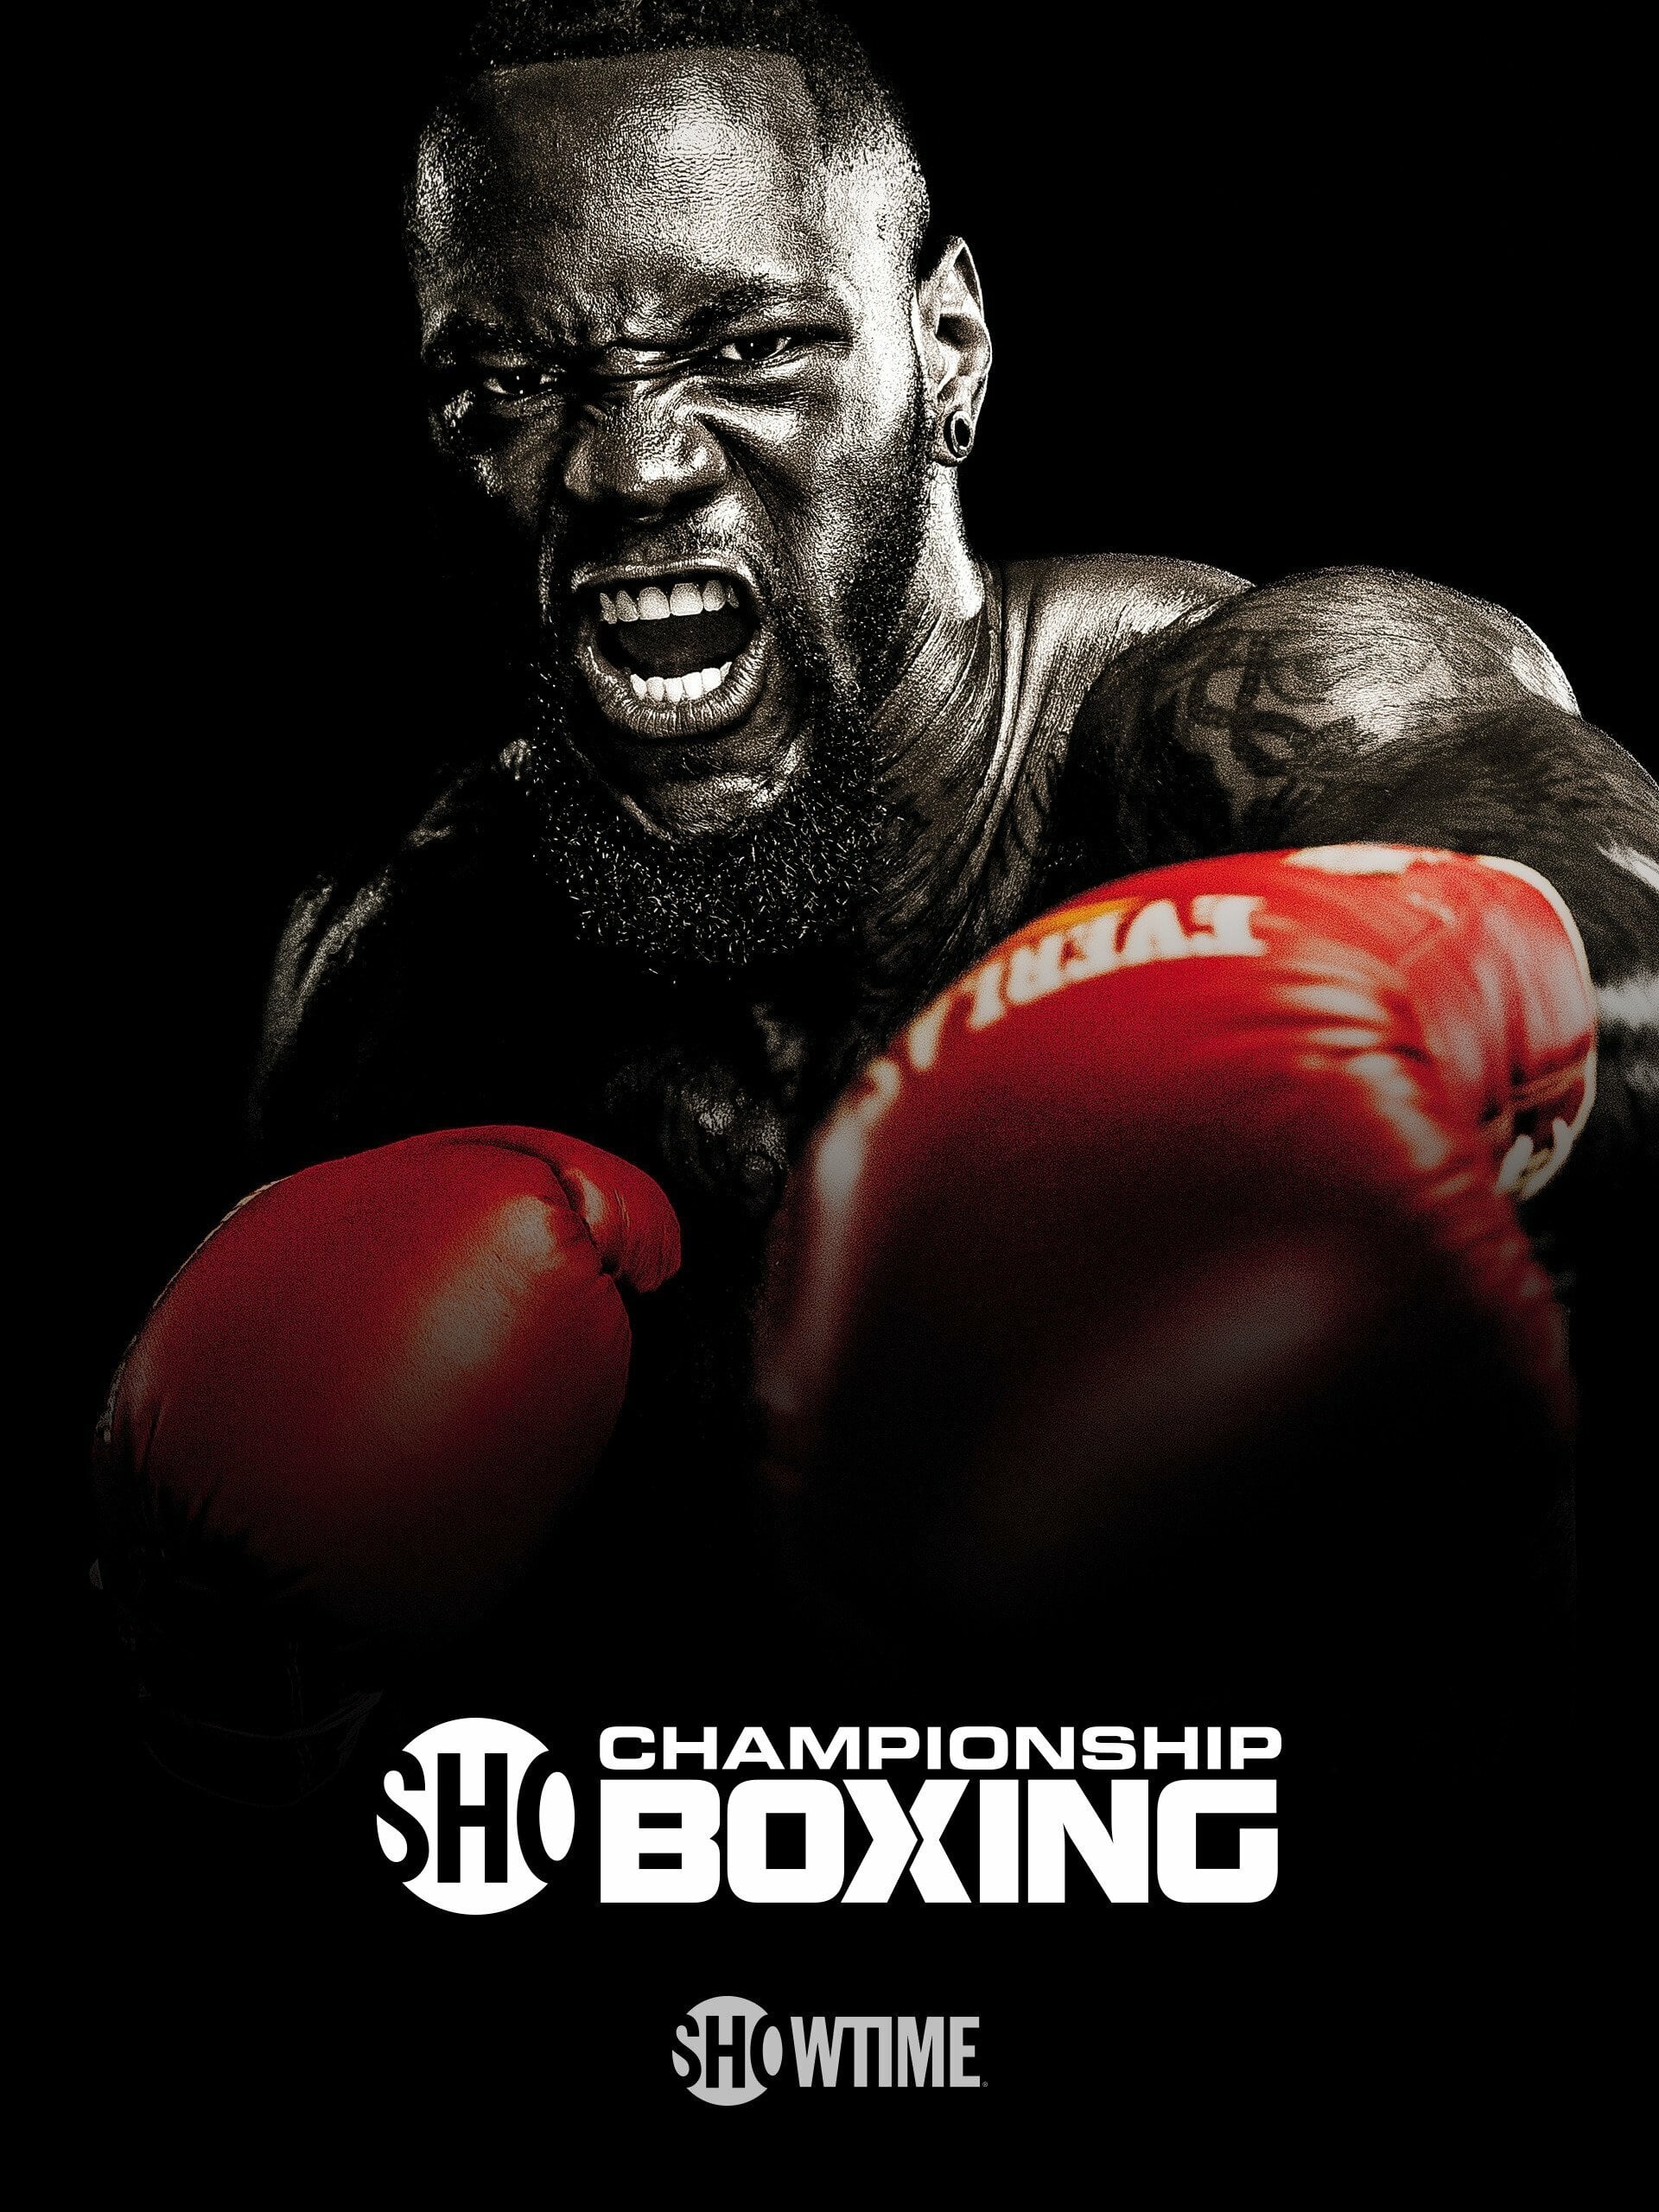 Showtime Championship Boxing (2021) The Poster Database (TPDb)